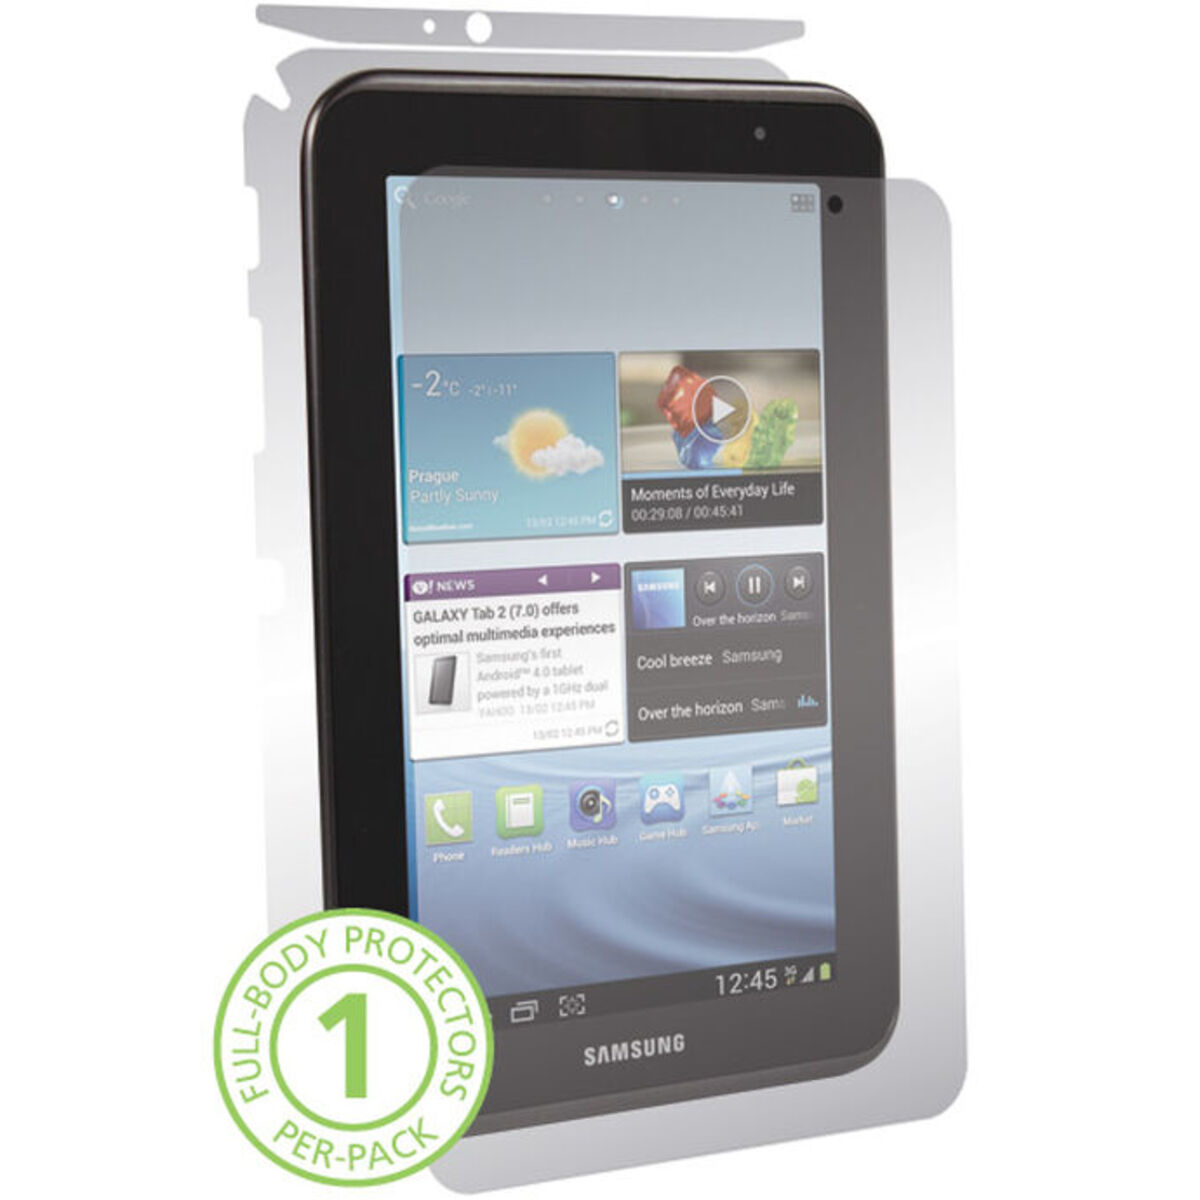 Samsung Galaxy Tab 2 7.0 Screen Protectors and Clear Skins by